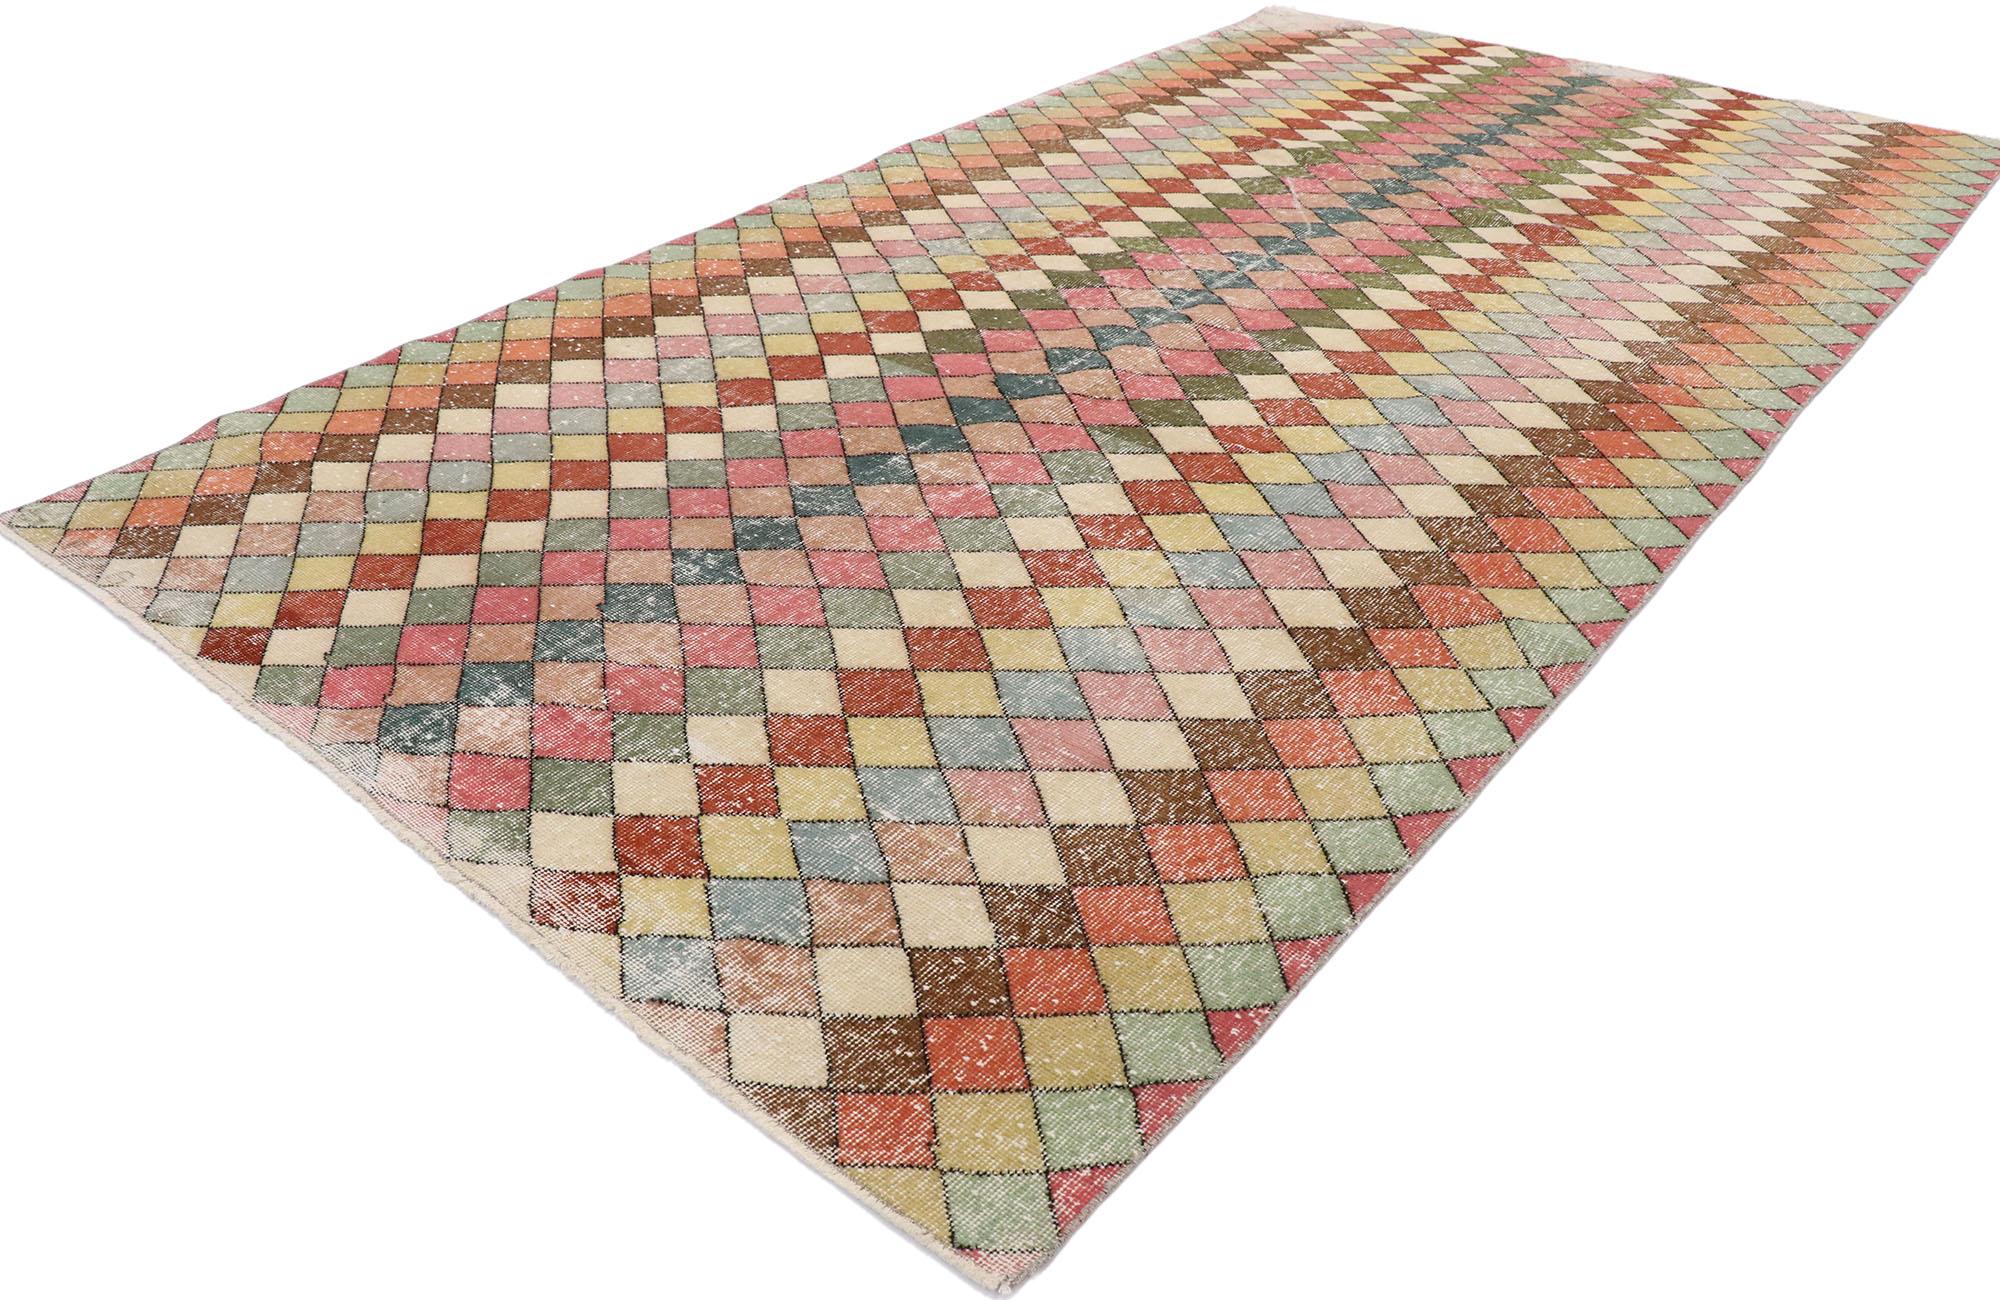 53293, distressed vintage Turkish Sivas rug with Mid-Century Modern Bohemian style. This hand knotted wool distressed vintage Turkish Sivas rug features an all-over diamond pattern comprised of multicolored lozenges. The colors are arranged in a